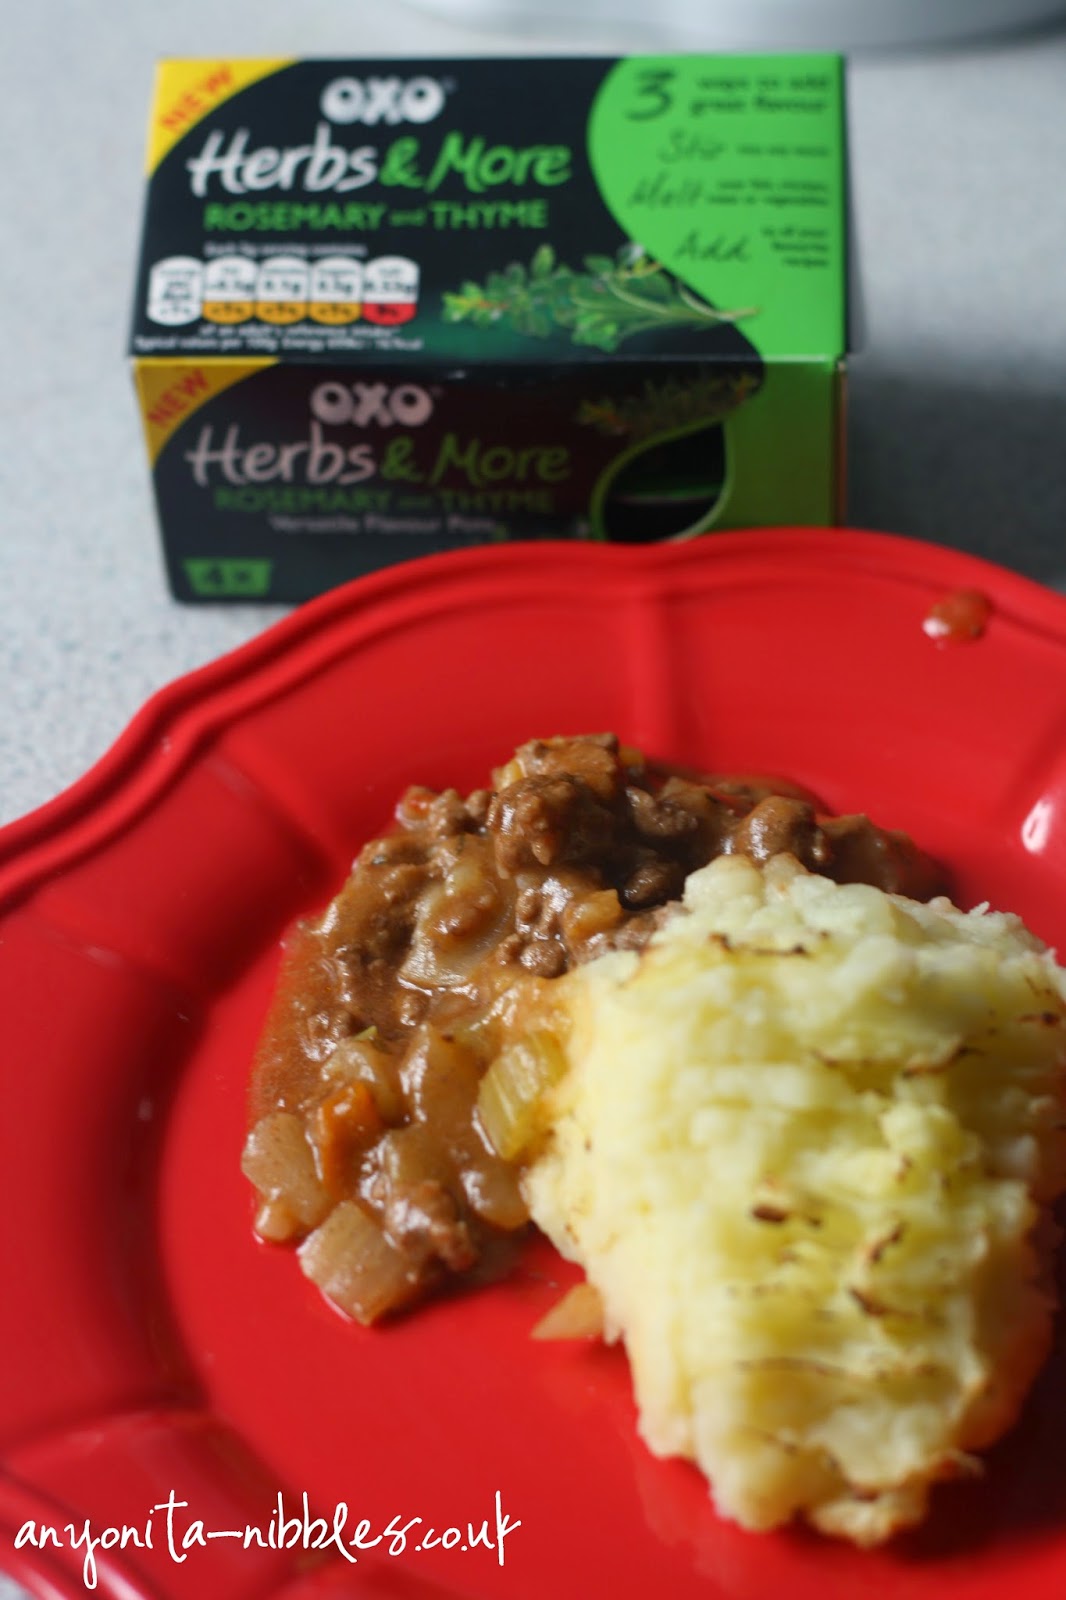 A serving of OXO's Kitchen Magician Cottage Pie from Anyonita-nibbles.co.uk